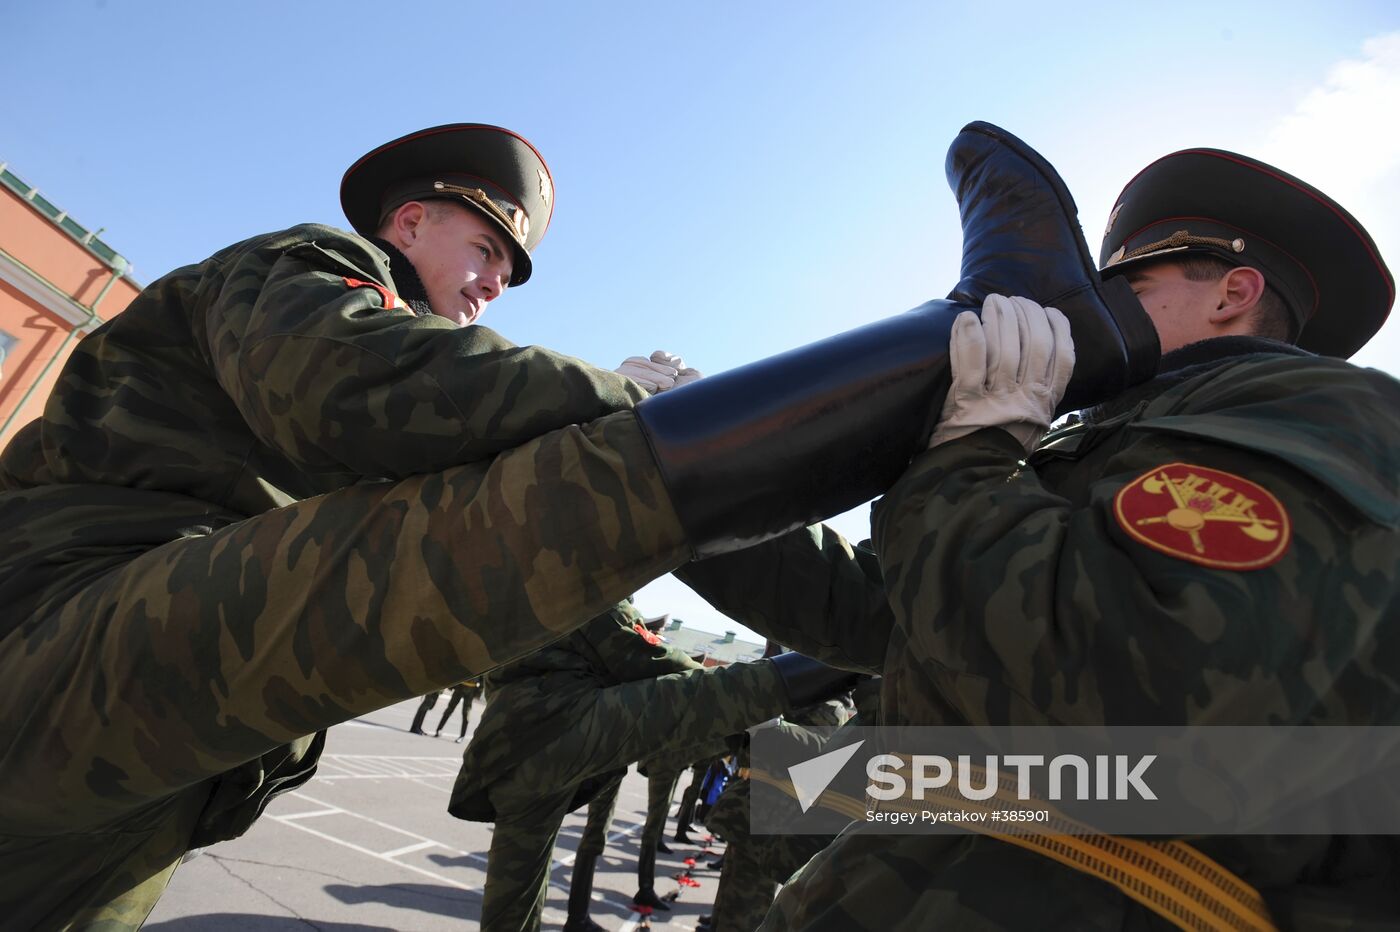 Preparations for Victory Day parade on May 9